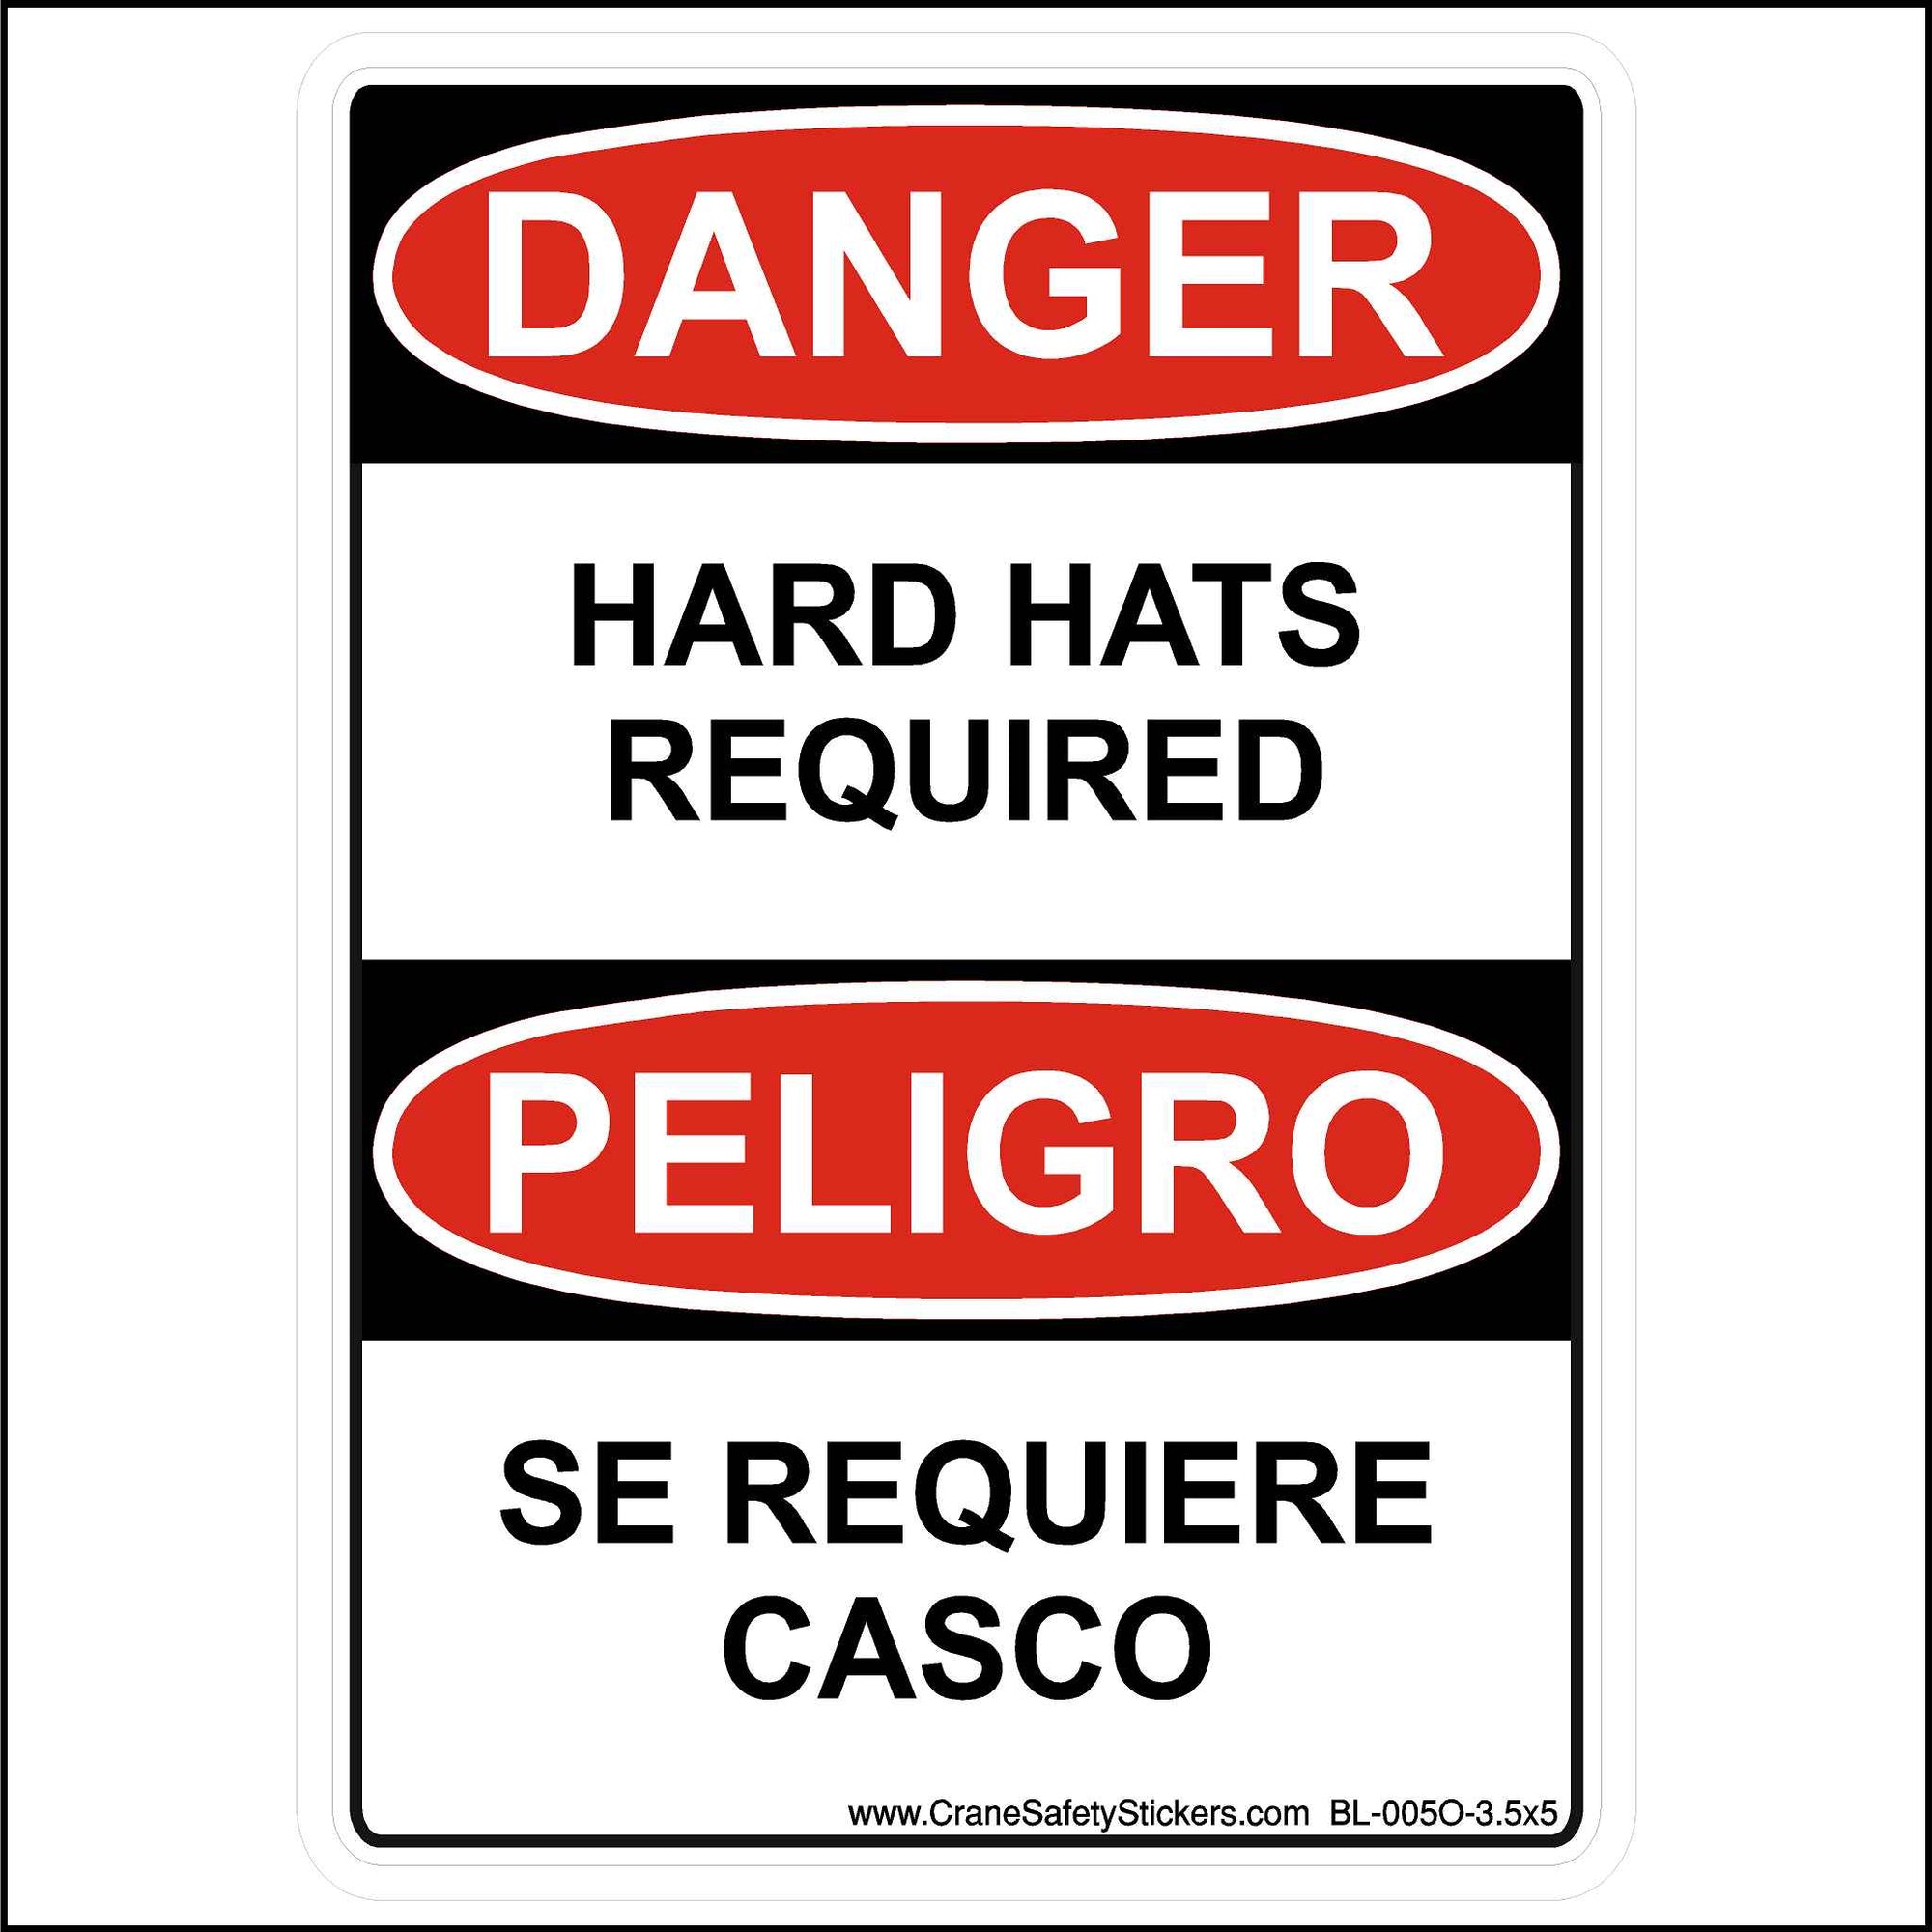 This Bilingual English and Spanish Danger Hard Hats Required Sticker Is Printed With. DANGER Hard Hats Required. PELIGRO SE REQUIERE CASCO.